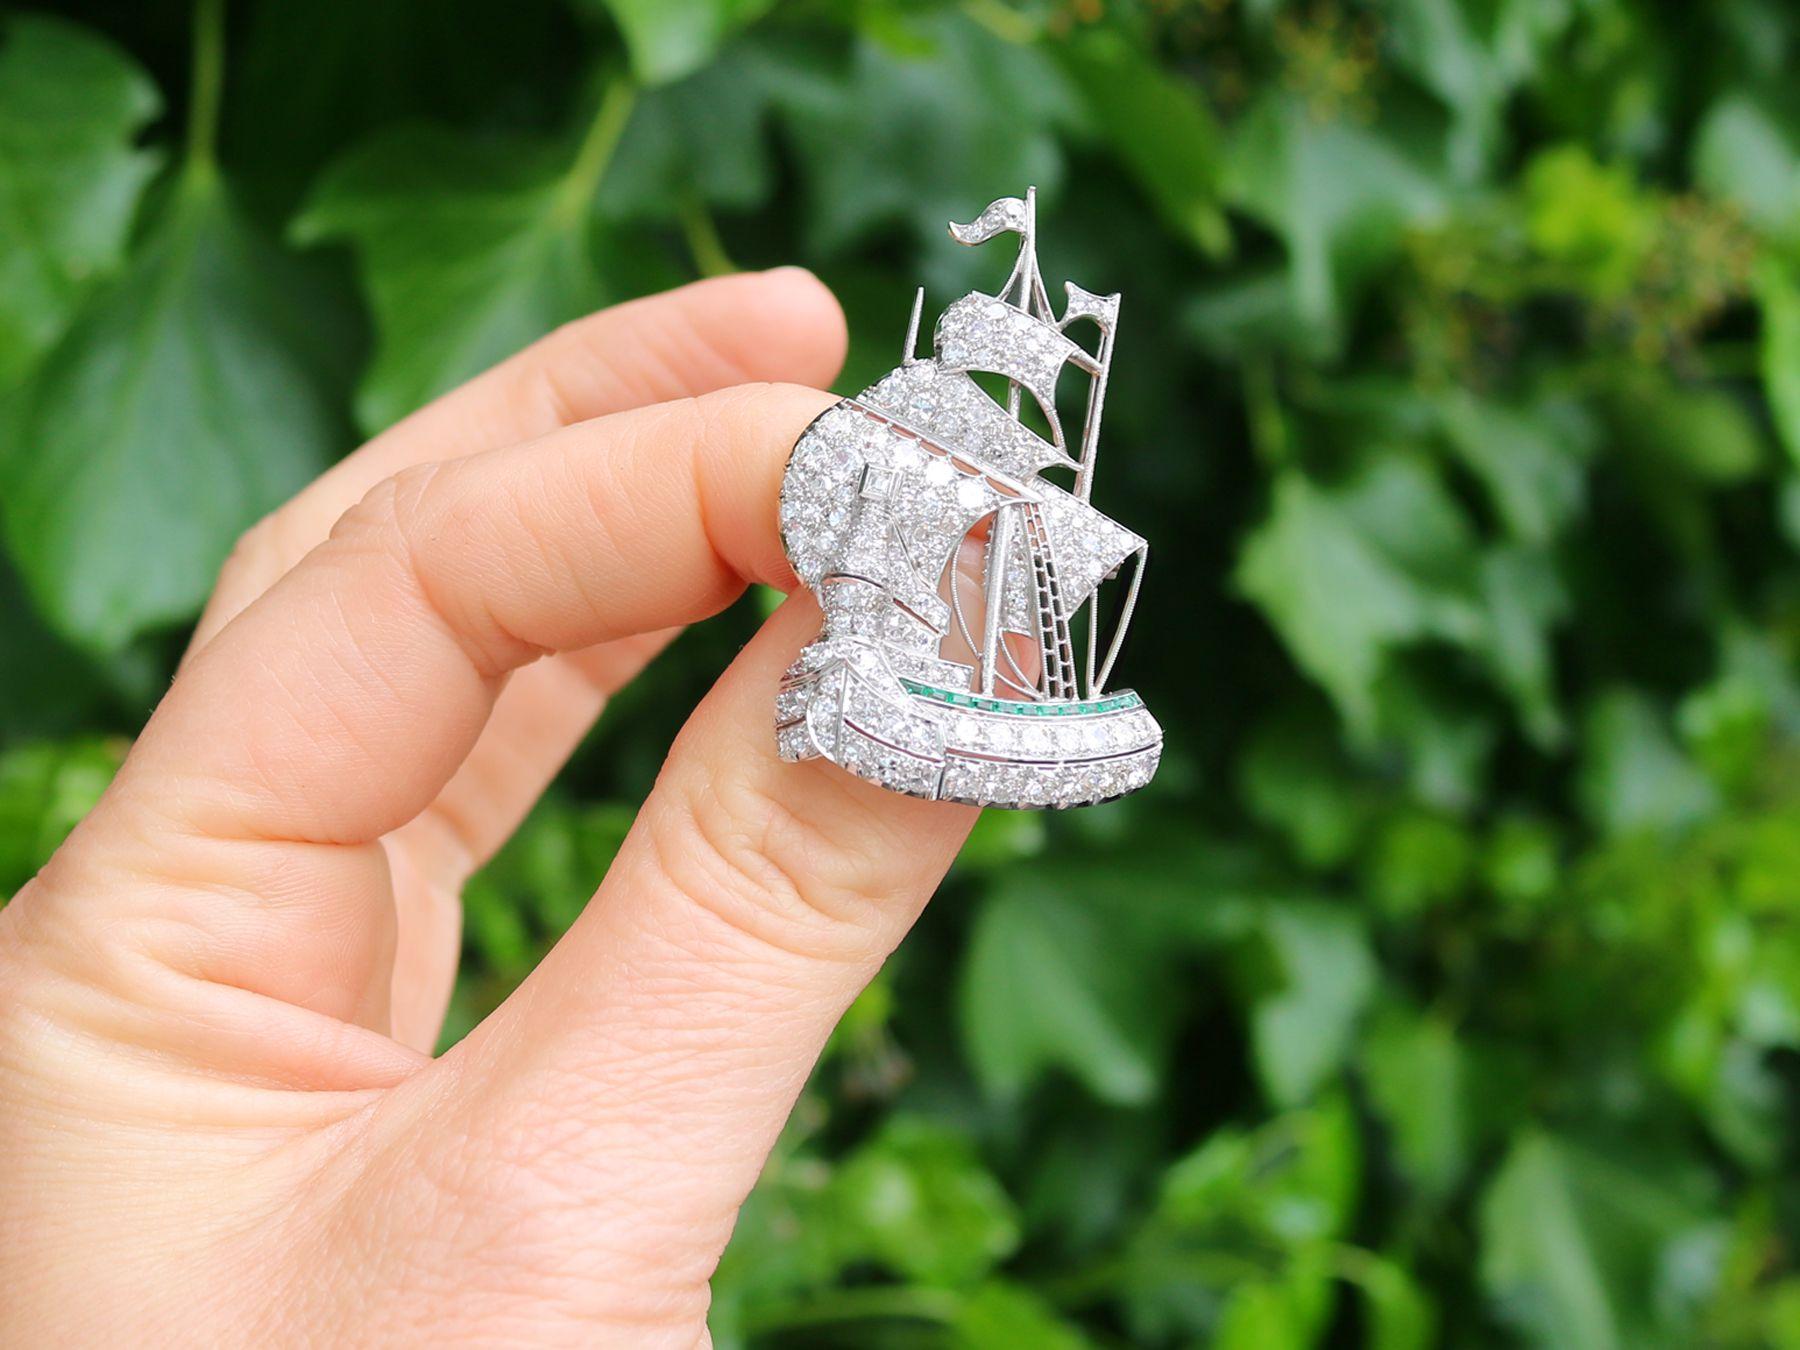 A magnificent and impressive antique 2.65 carat diamond and 0.28 carat natural emerald, platinum ship brooch; part of our diverse antique jewelry collections.

This magnificent, stunning, fine and impressive antique ship brooch has been crafted in